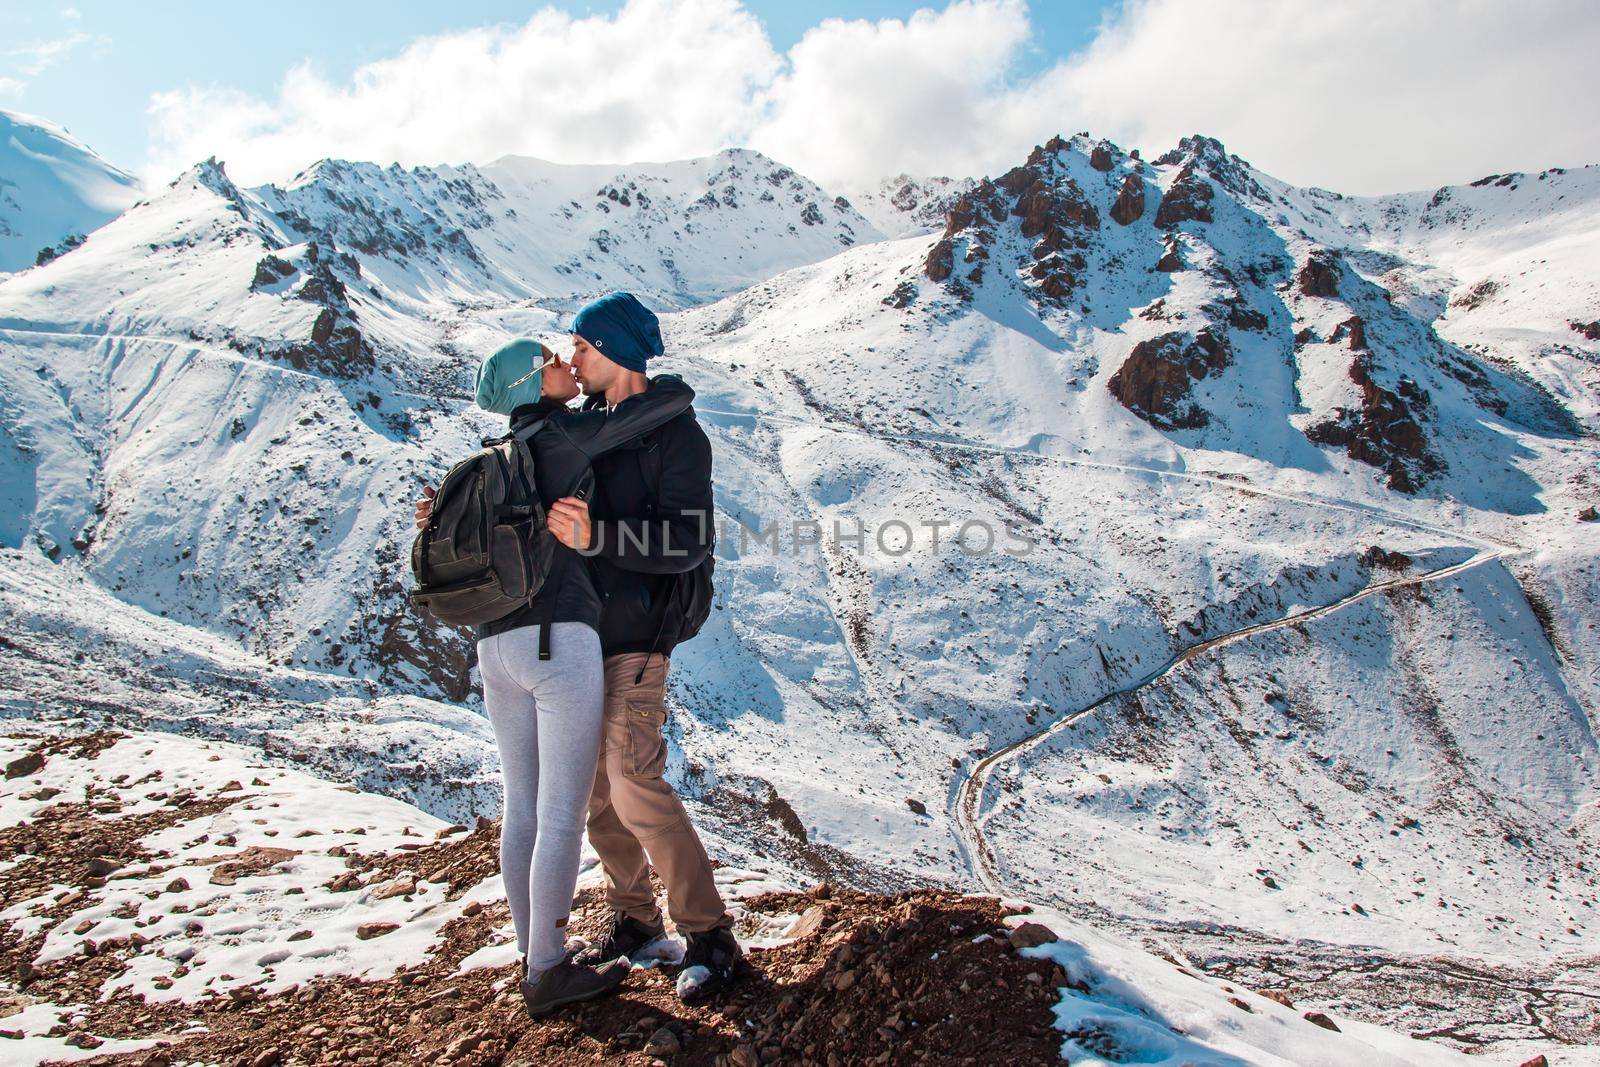 A kiss between a man and a woman amid snow mountains. Holiday in mountains.